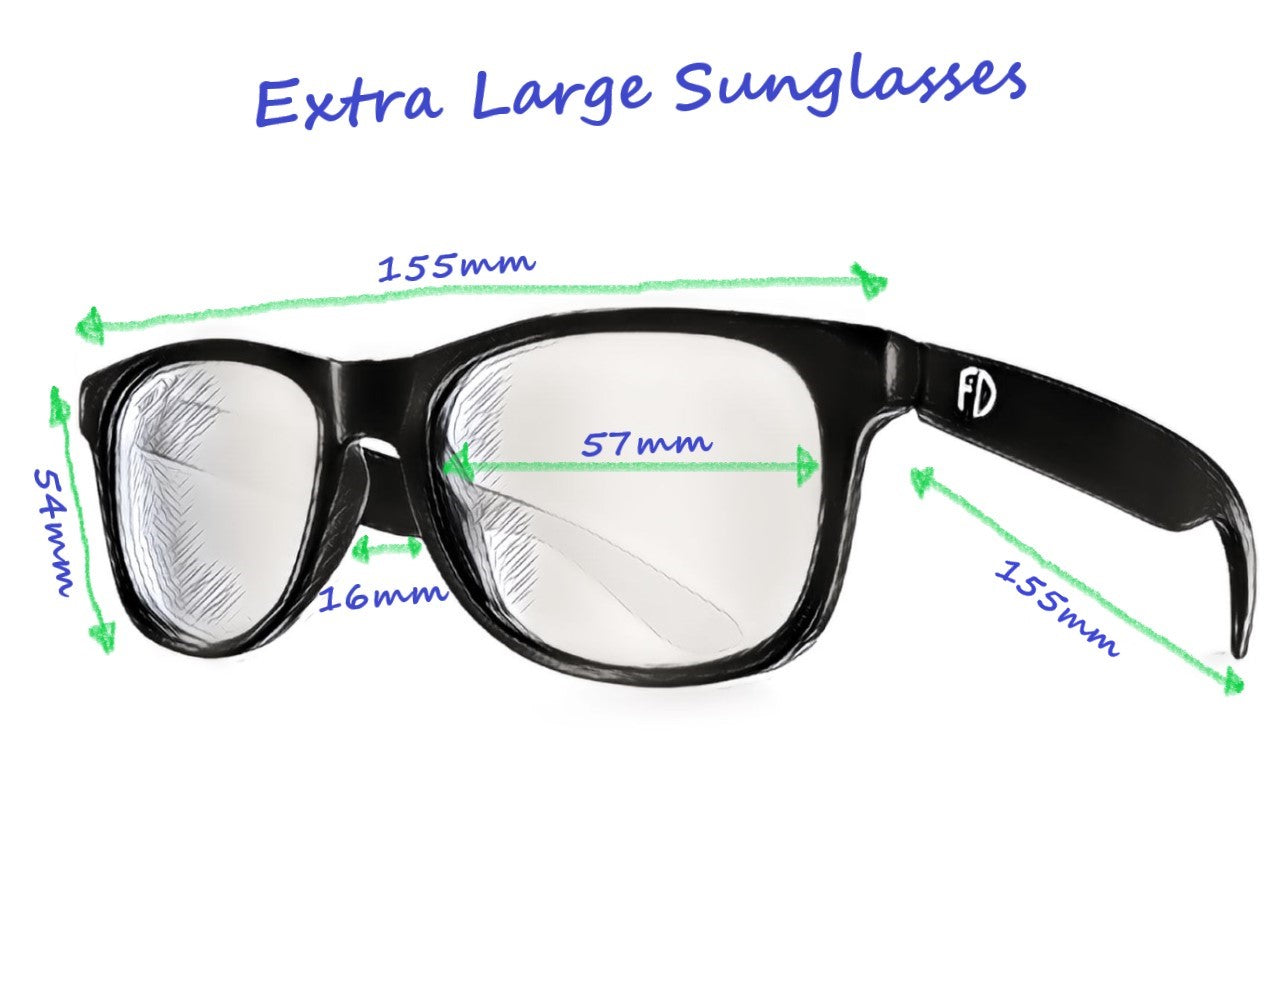 XXL Size Extra Large Square 157MM Polarized Sunglasses for Big Wide Heads  Men TR90 Lightweight UV400 Glasses